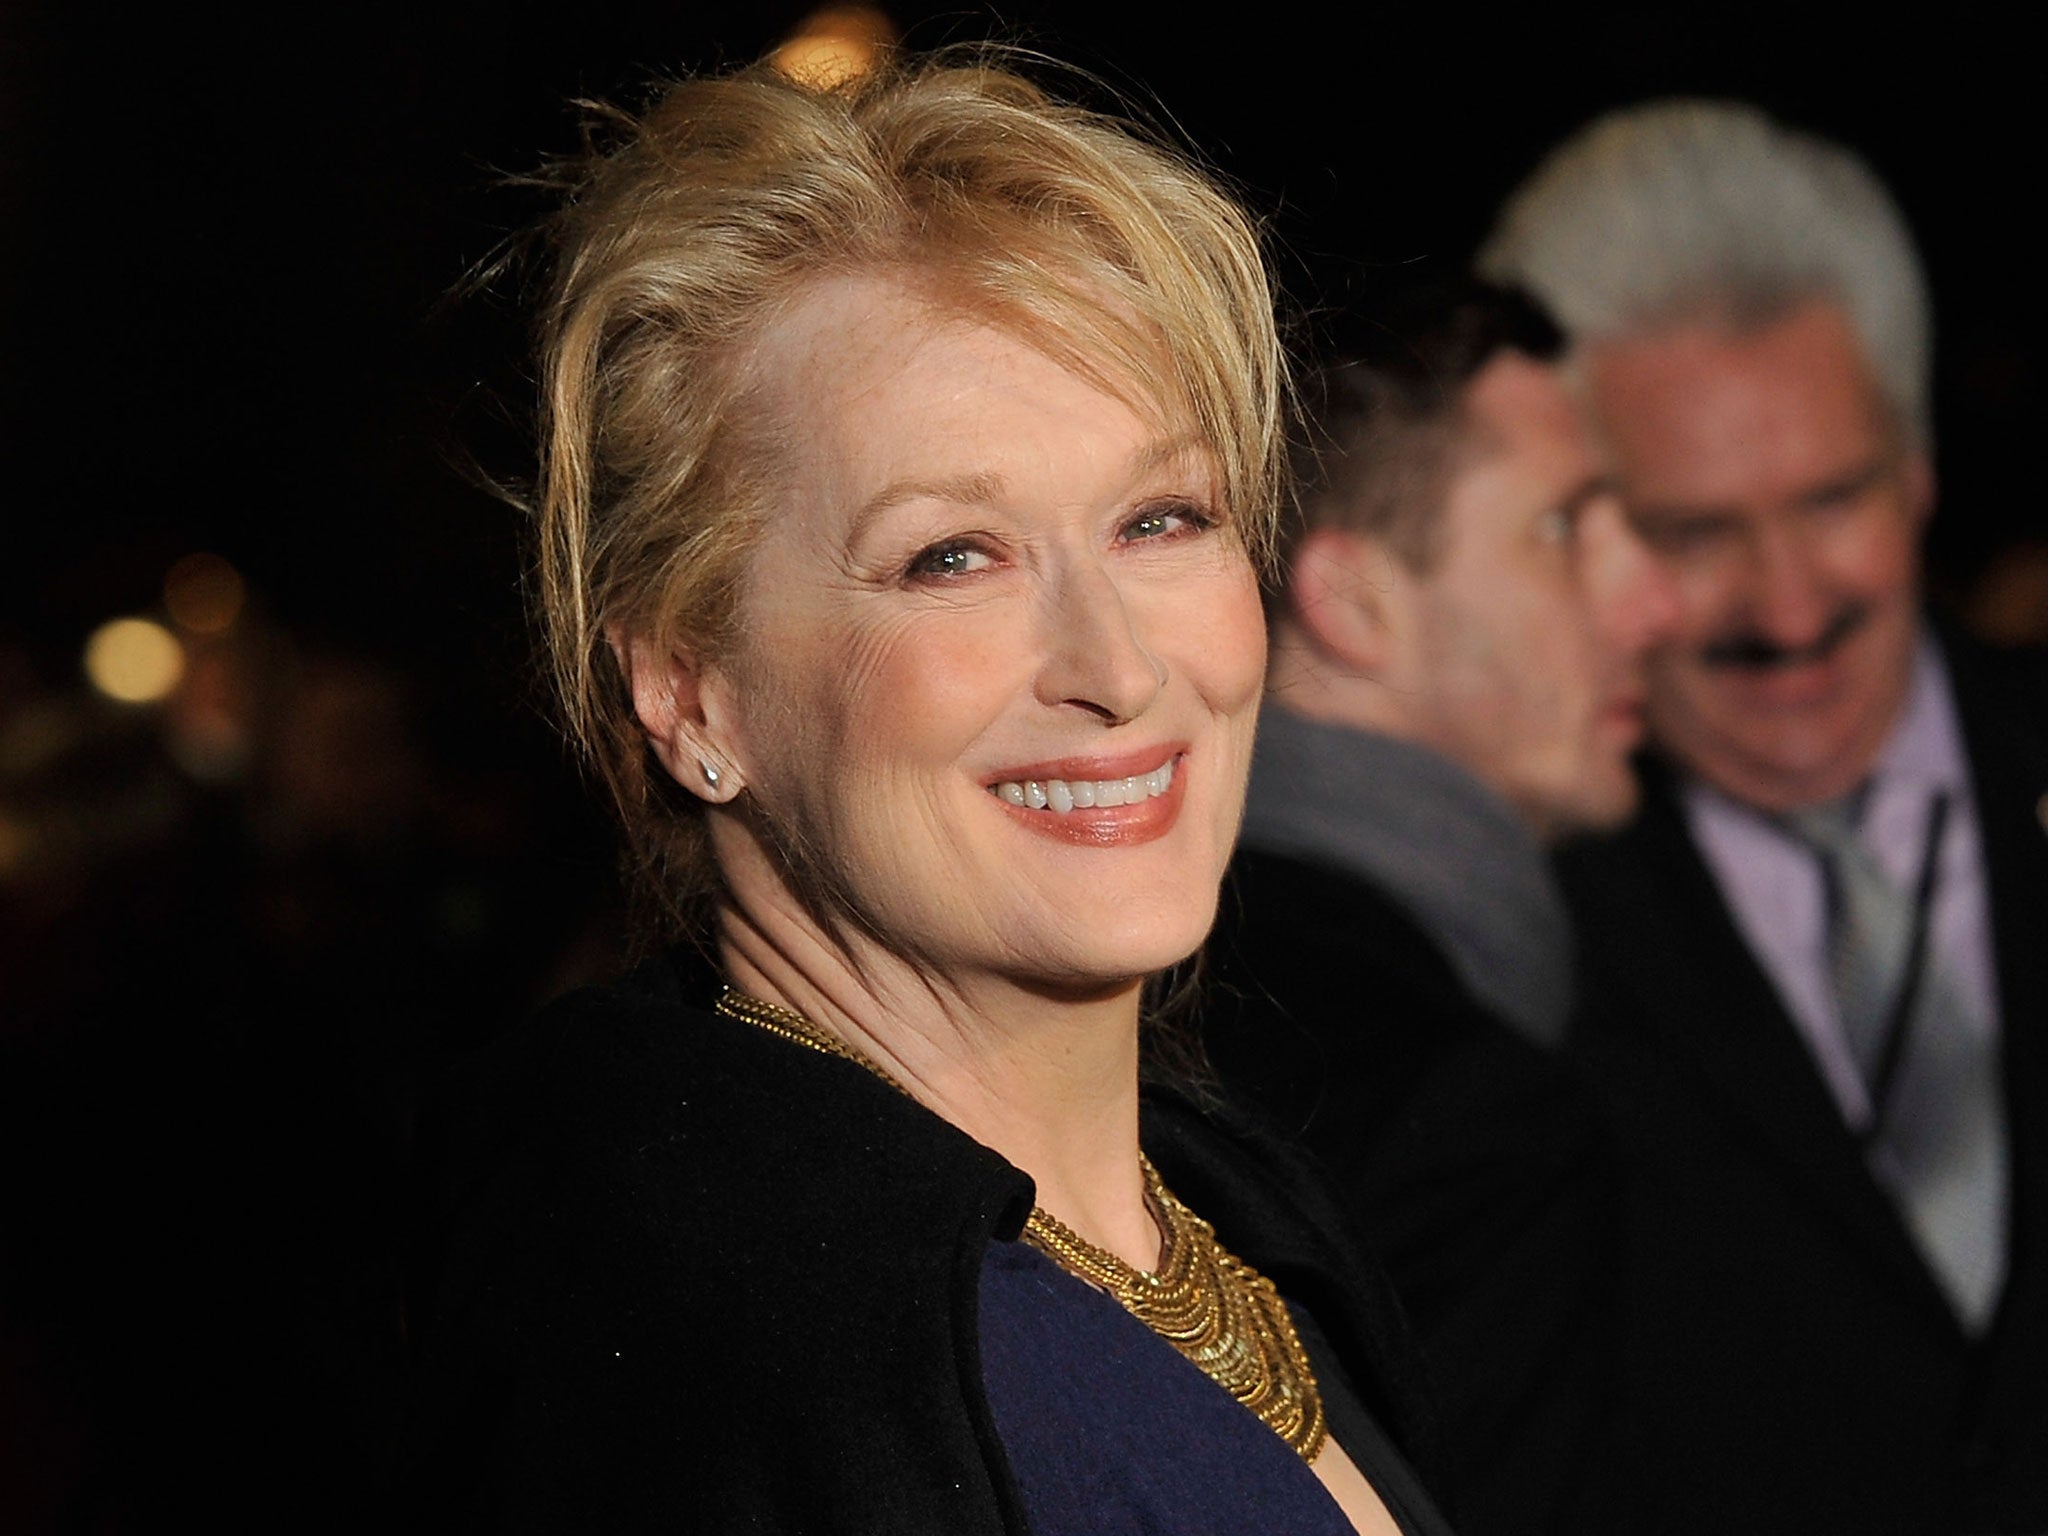 Meryl Streep has been thanked more often than God in Oscar acceptance speeches, but she has been nominated 18 times and won 3 times herself